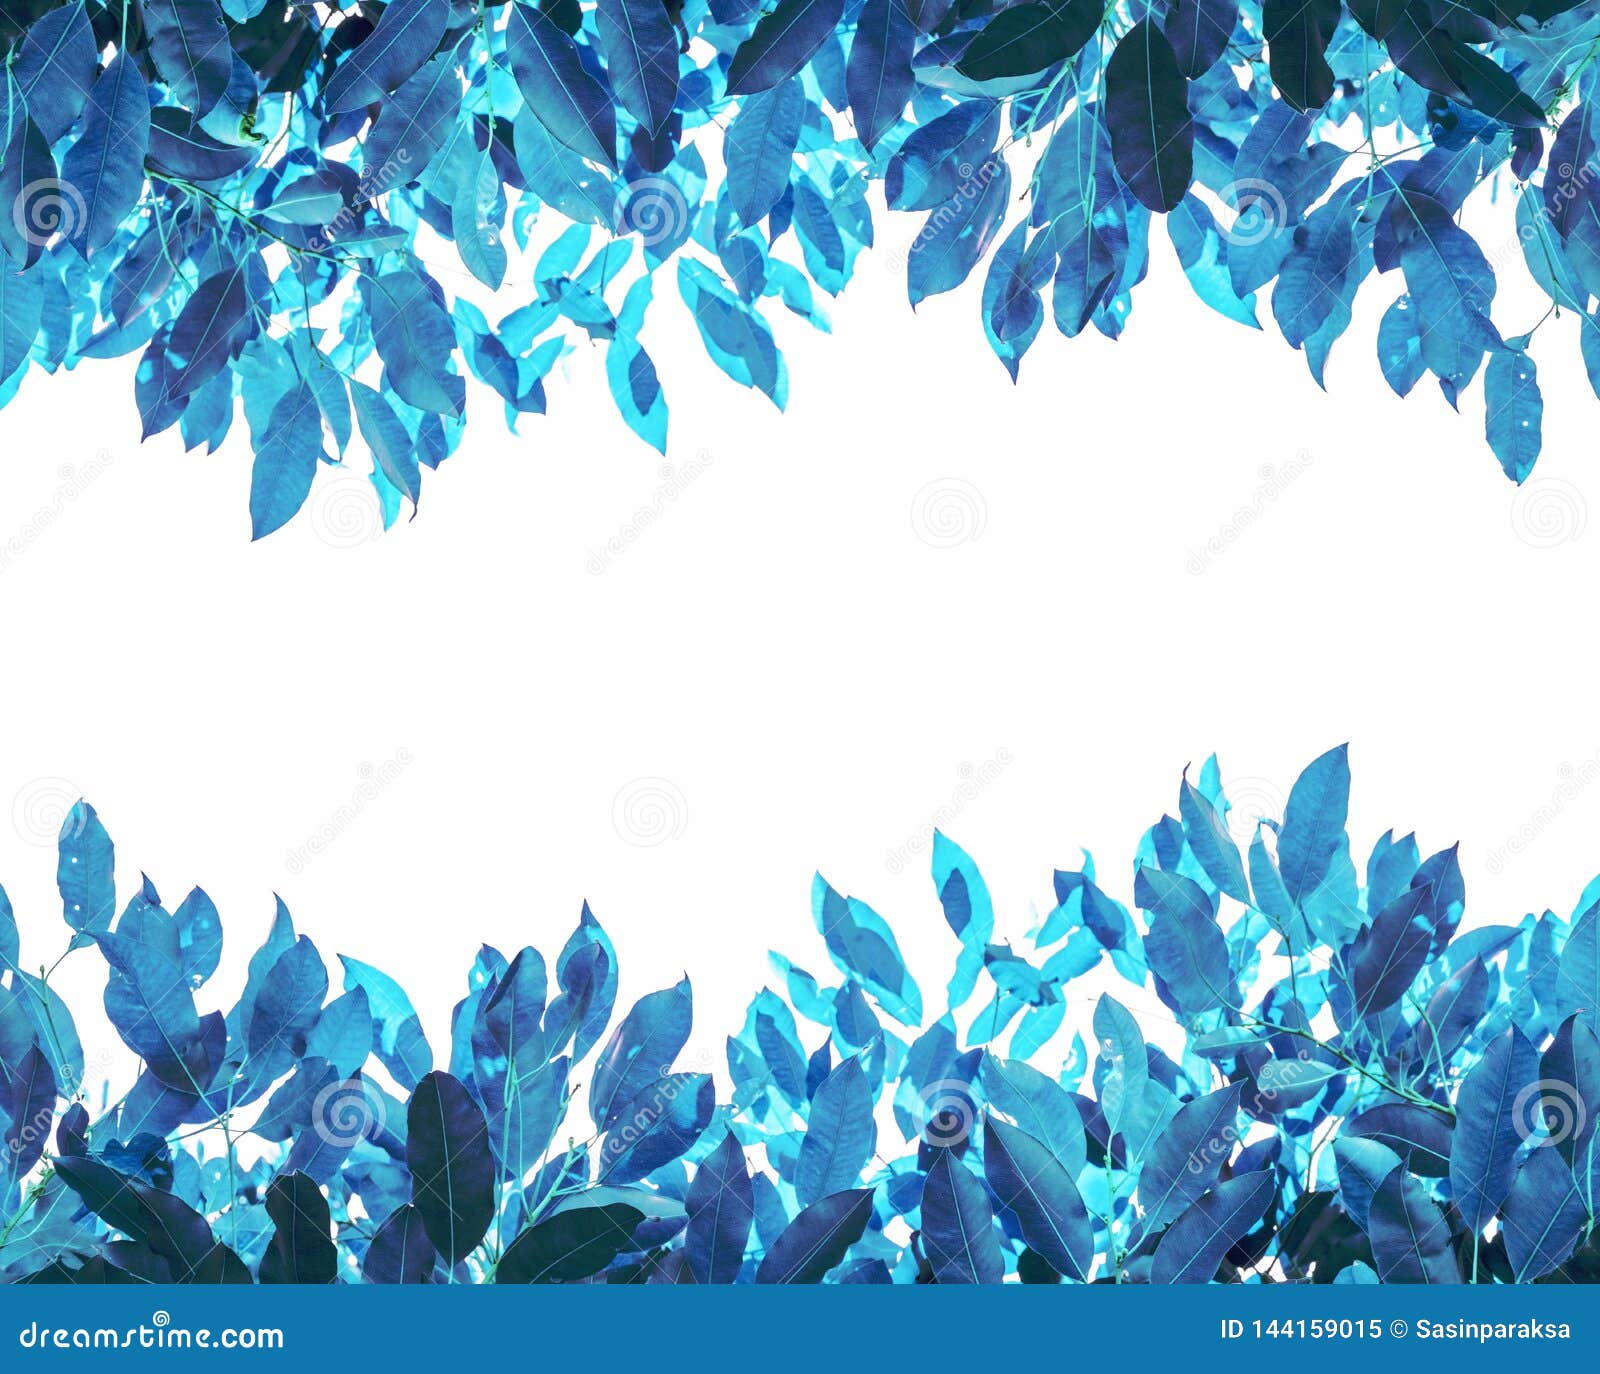 Colorful Blue Leaves, on White Background Stock Image - Image of ornament,  colorful: 144159015